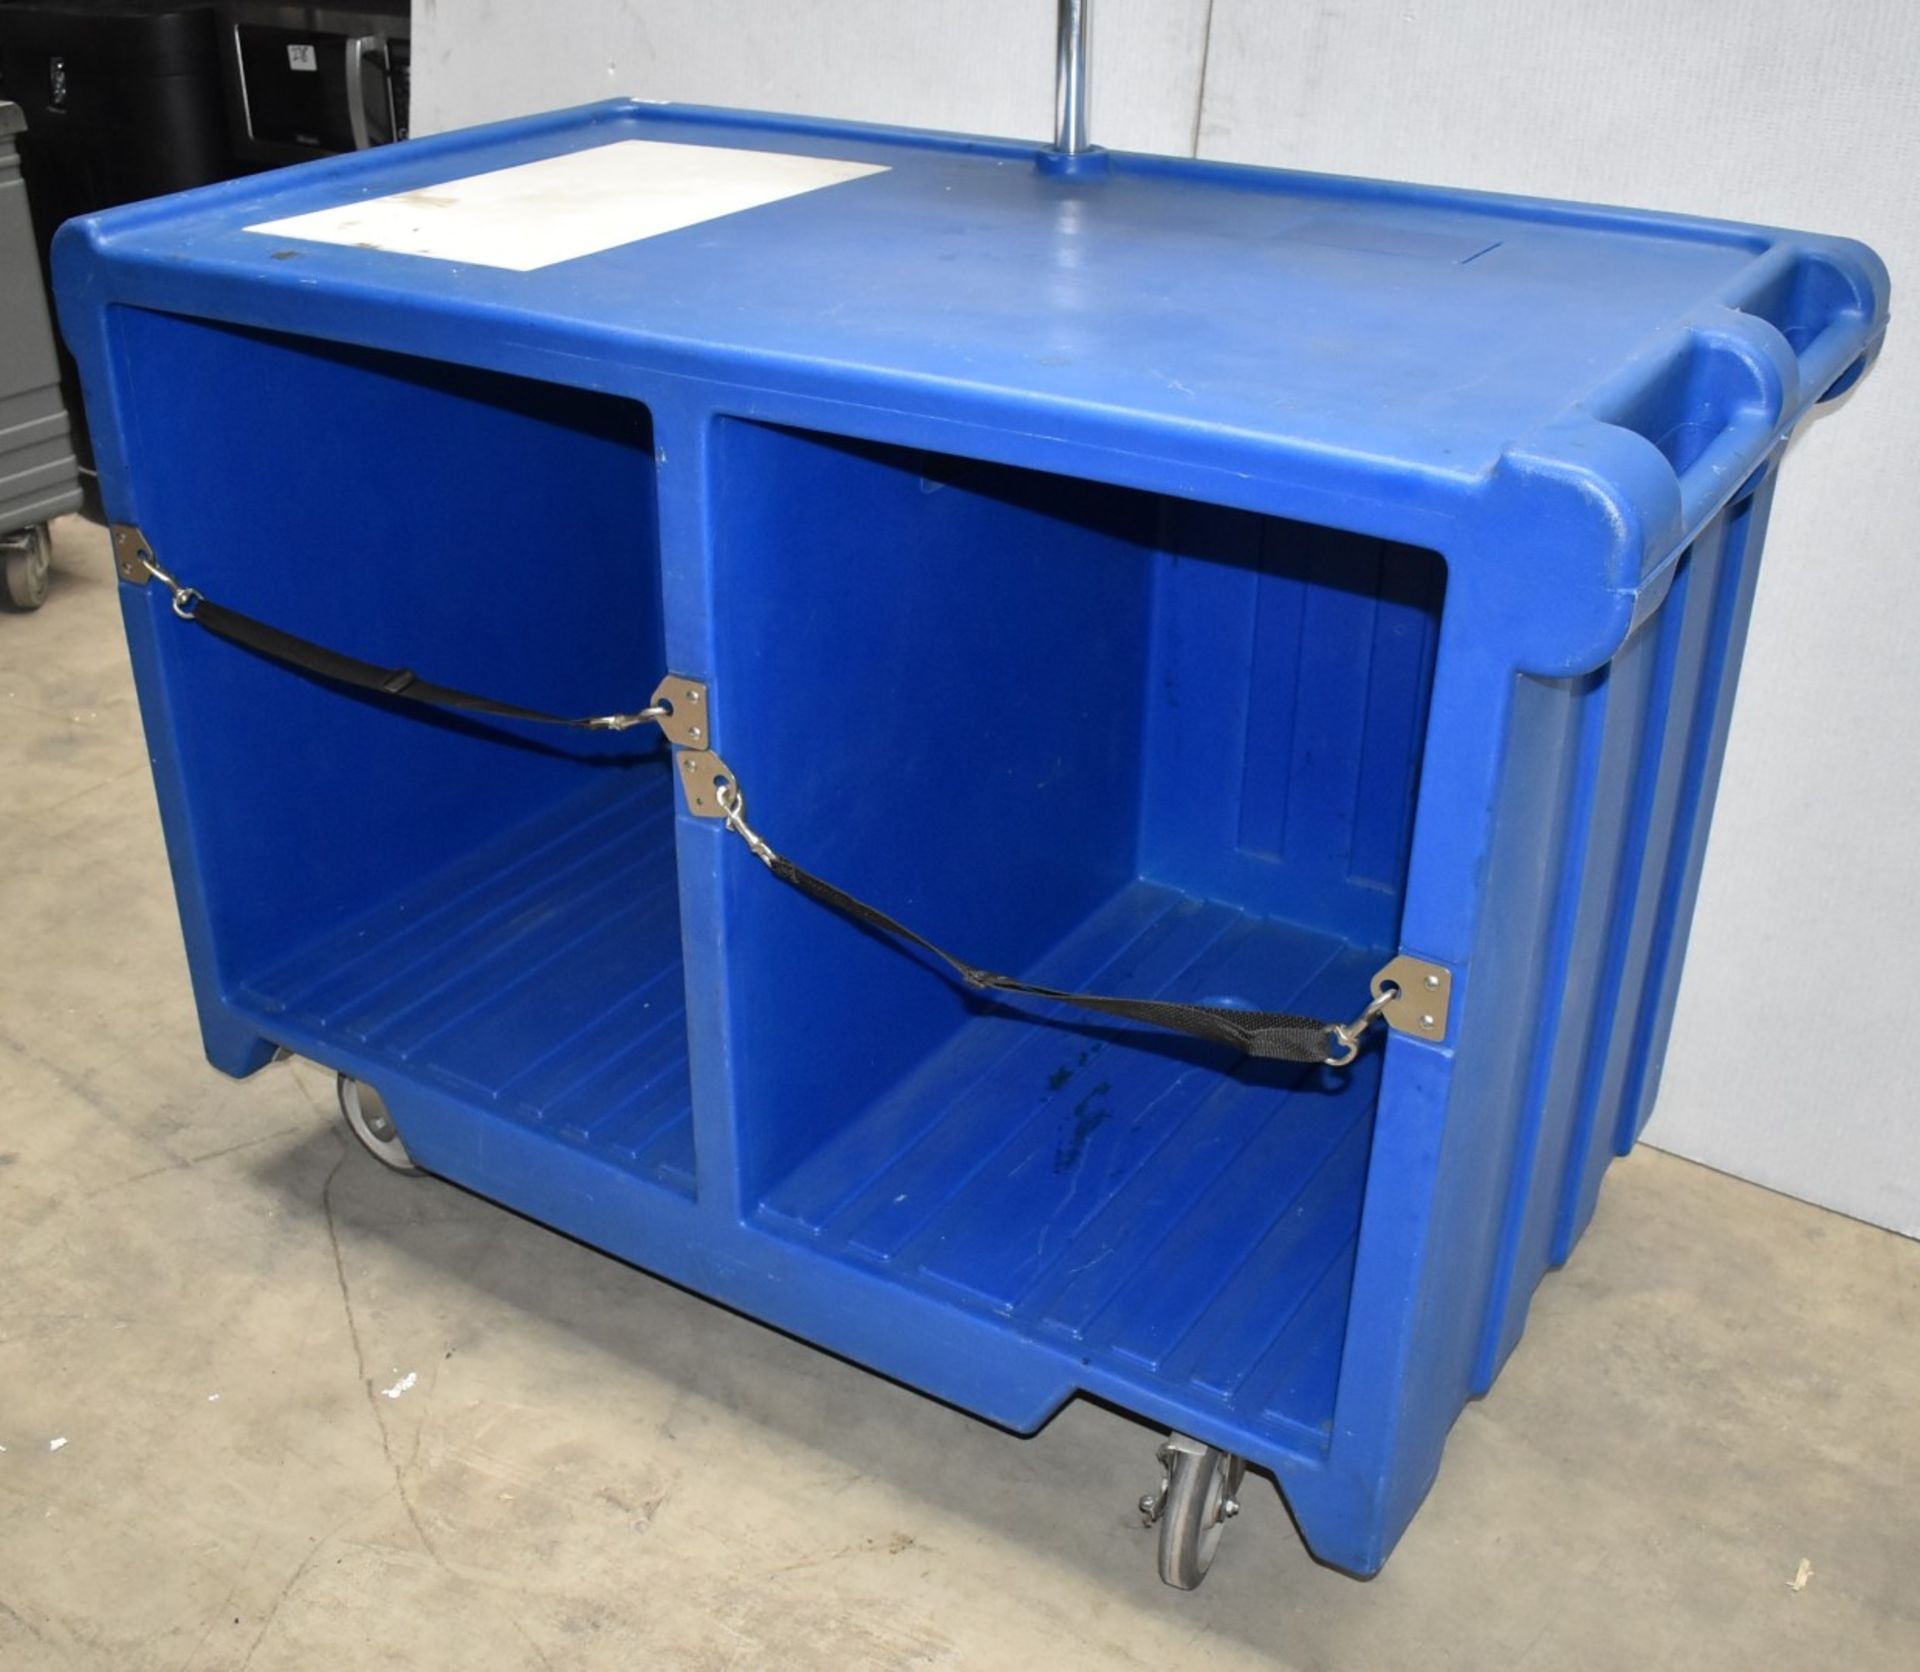 1 x Cambro Mobile BBQ Food Station With Parasol - Lightweight Plastic Design With Storage - Image 5 of 14